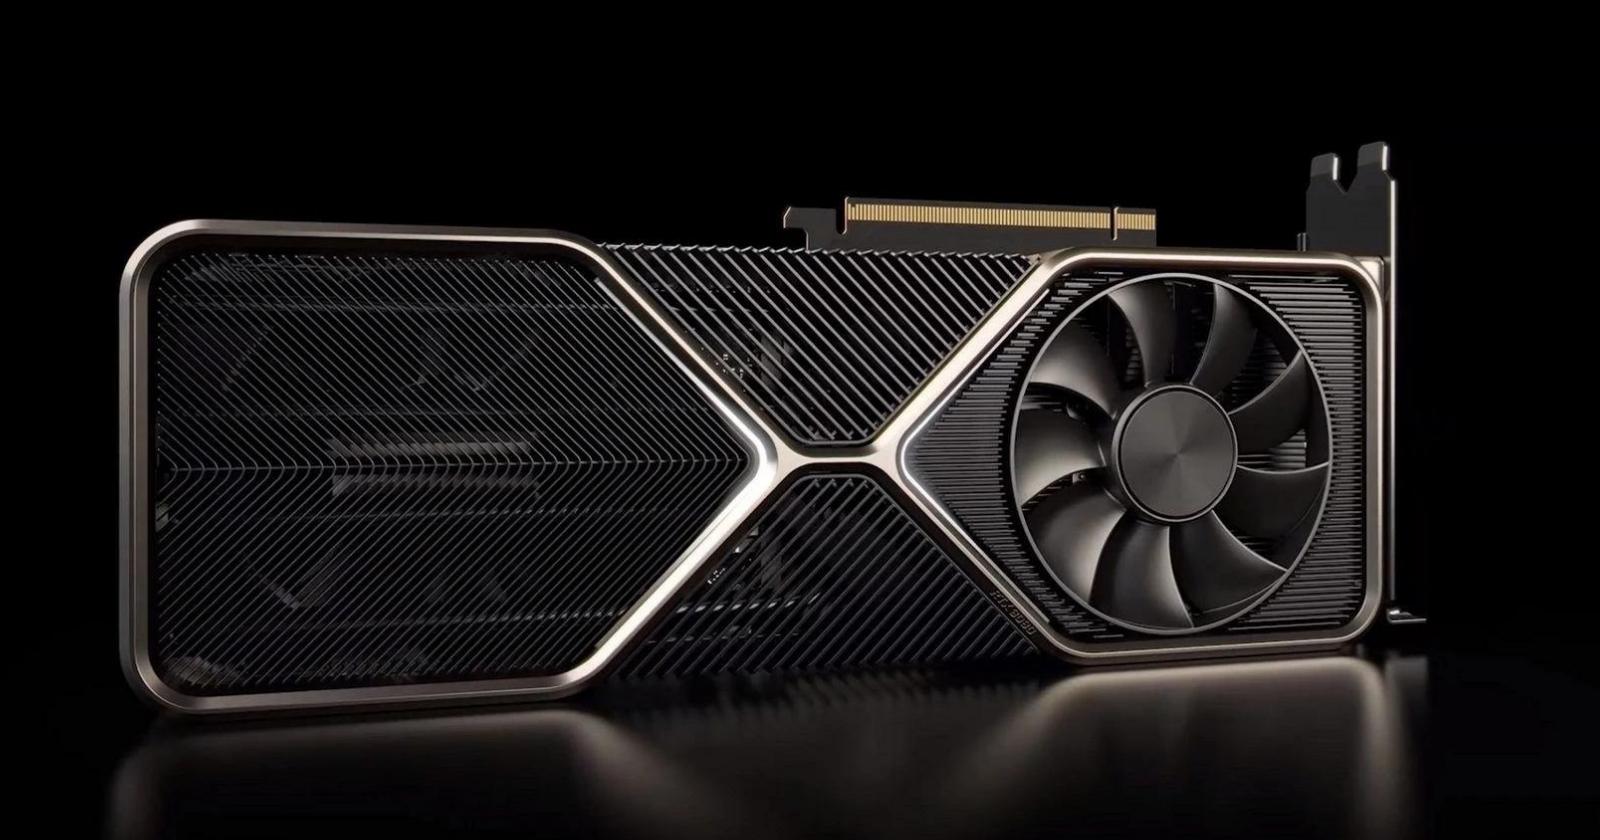 NVIDIA reportedly working on GeForce RTX 4080 Ti with AD102 GPU